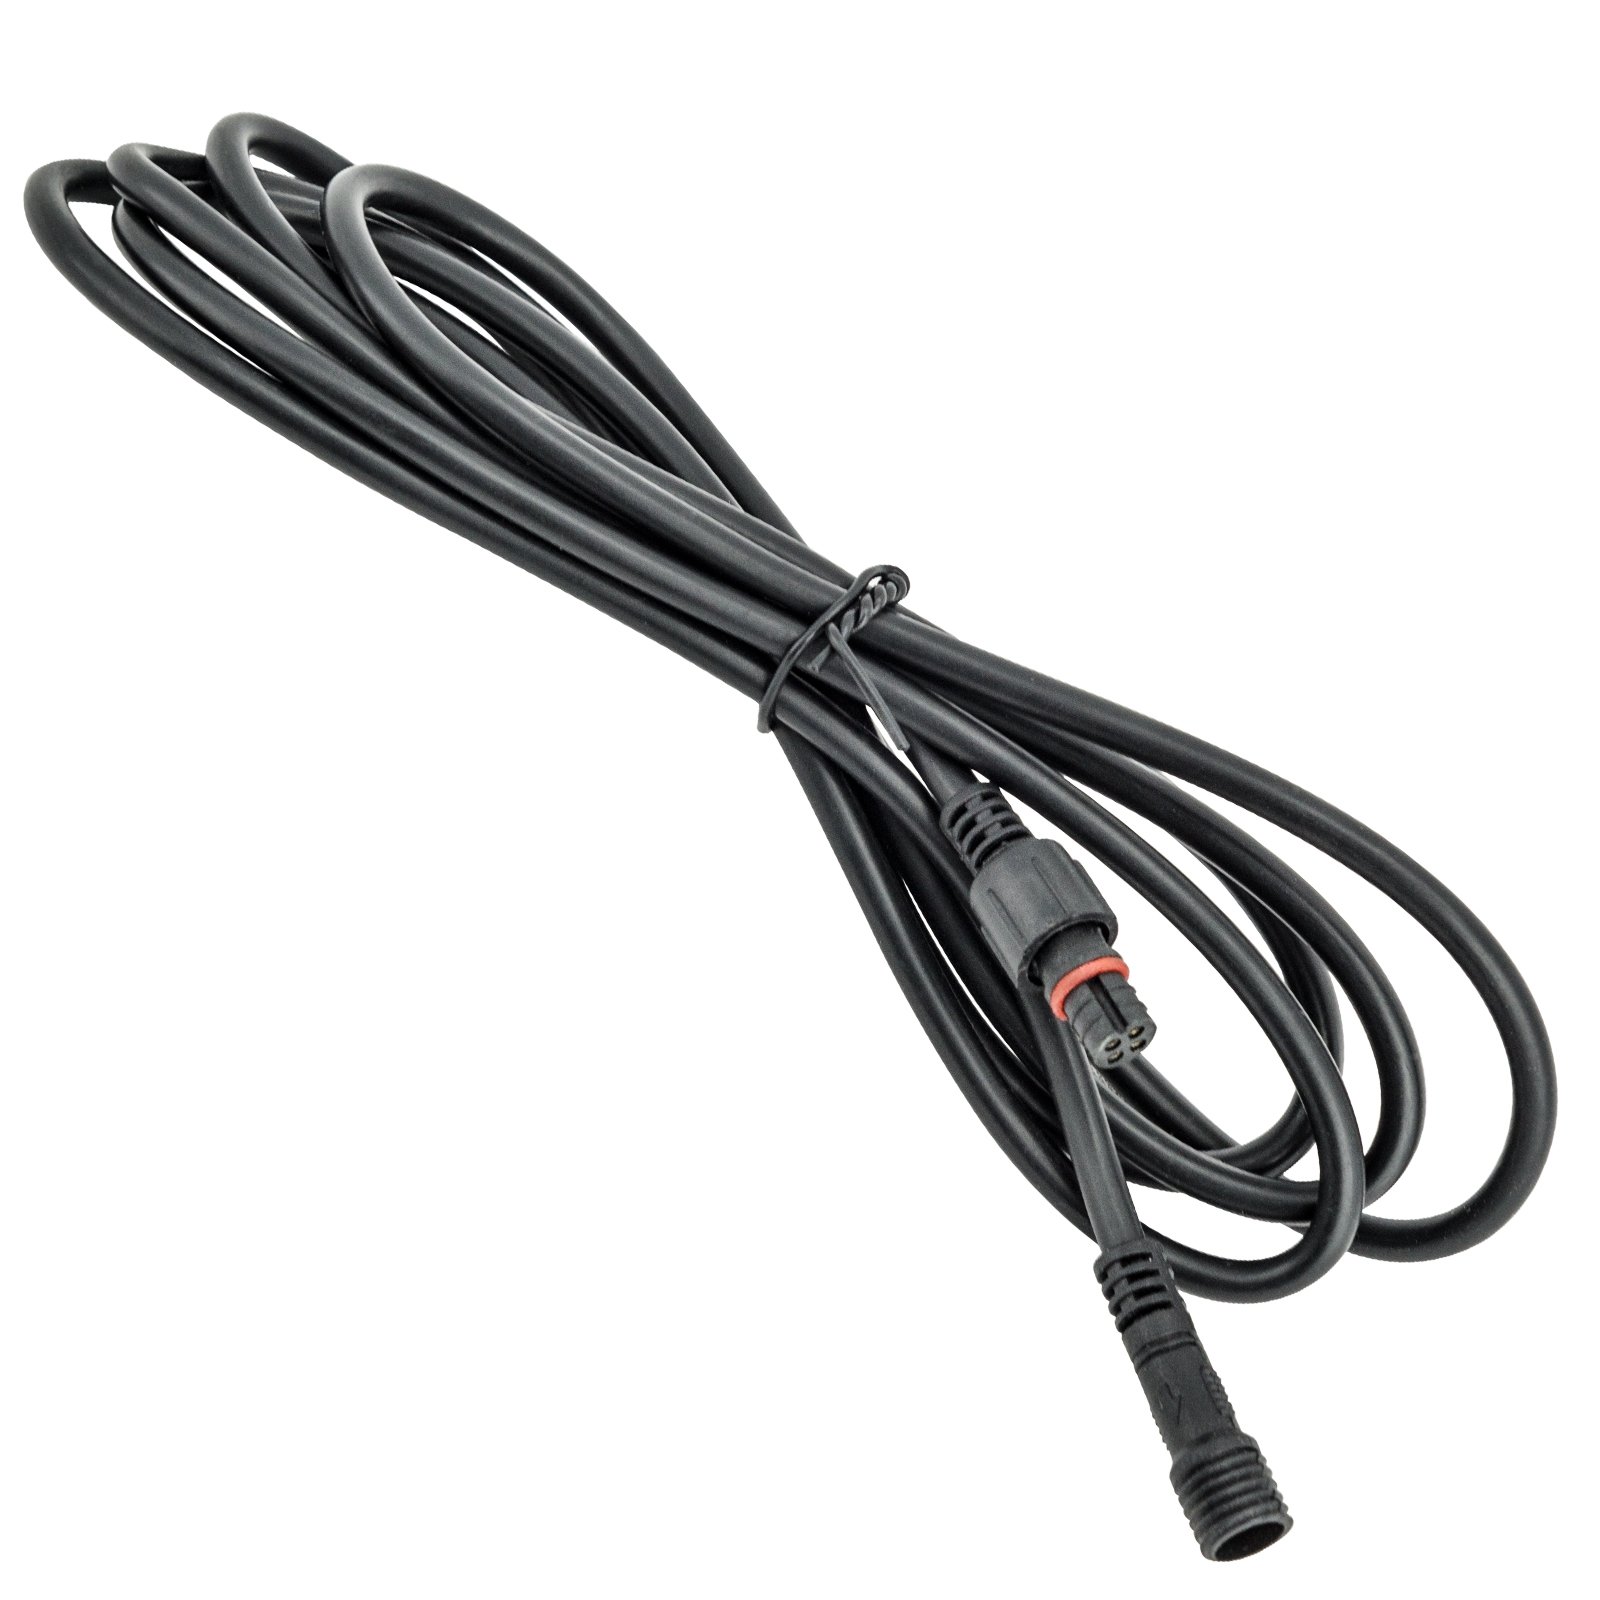 Oracle 4-Pin 6' Extension Cable For Colorshift Rock Lights, OL-5814-504